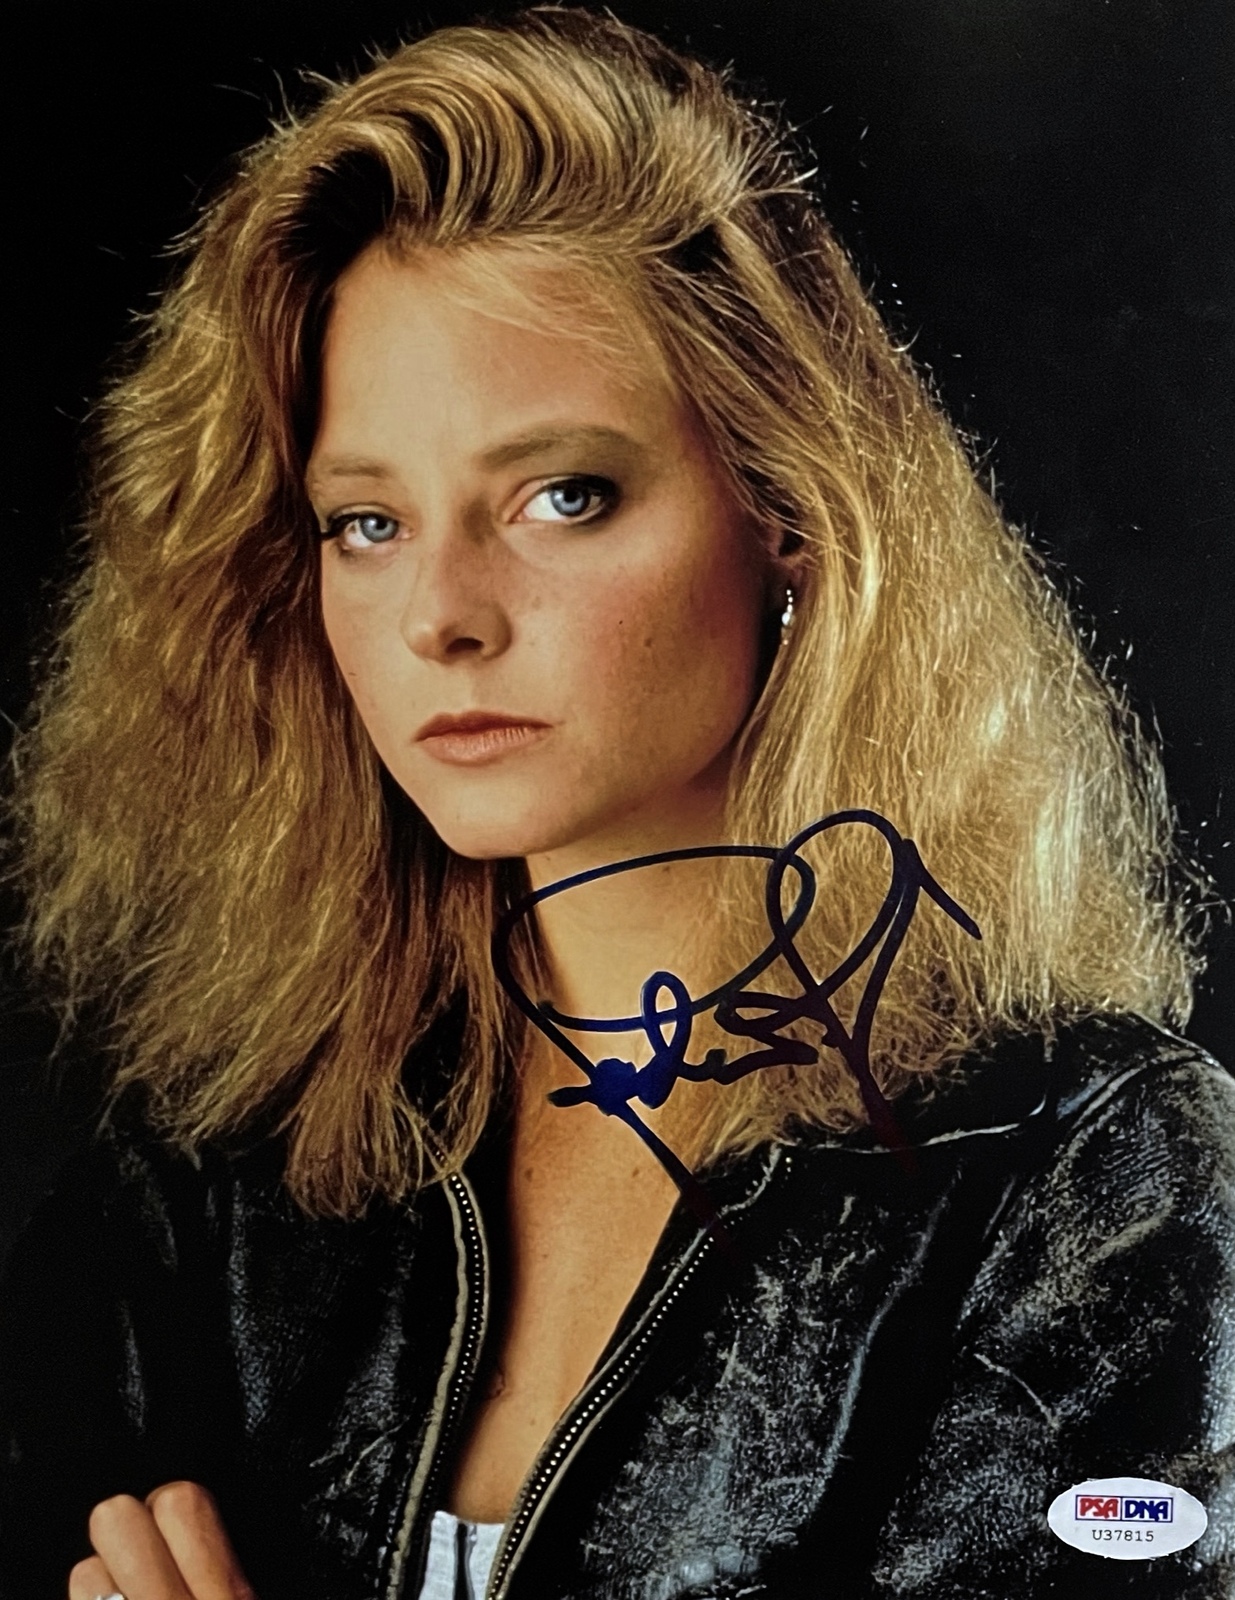 JODIE FOSTER Autographed Hand SIGNED 8x10 PHOTO THE ACCUSED PSA/DNA CERTIFIED  - $279.99